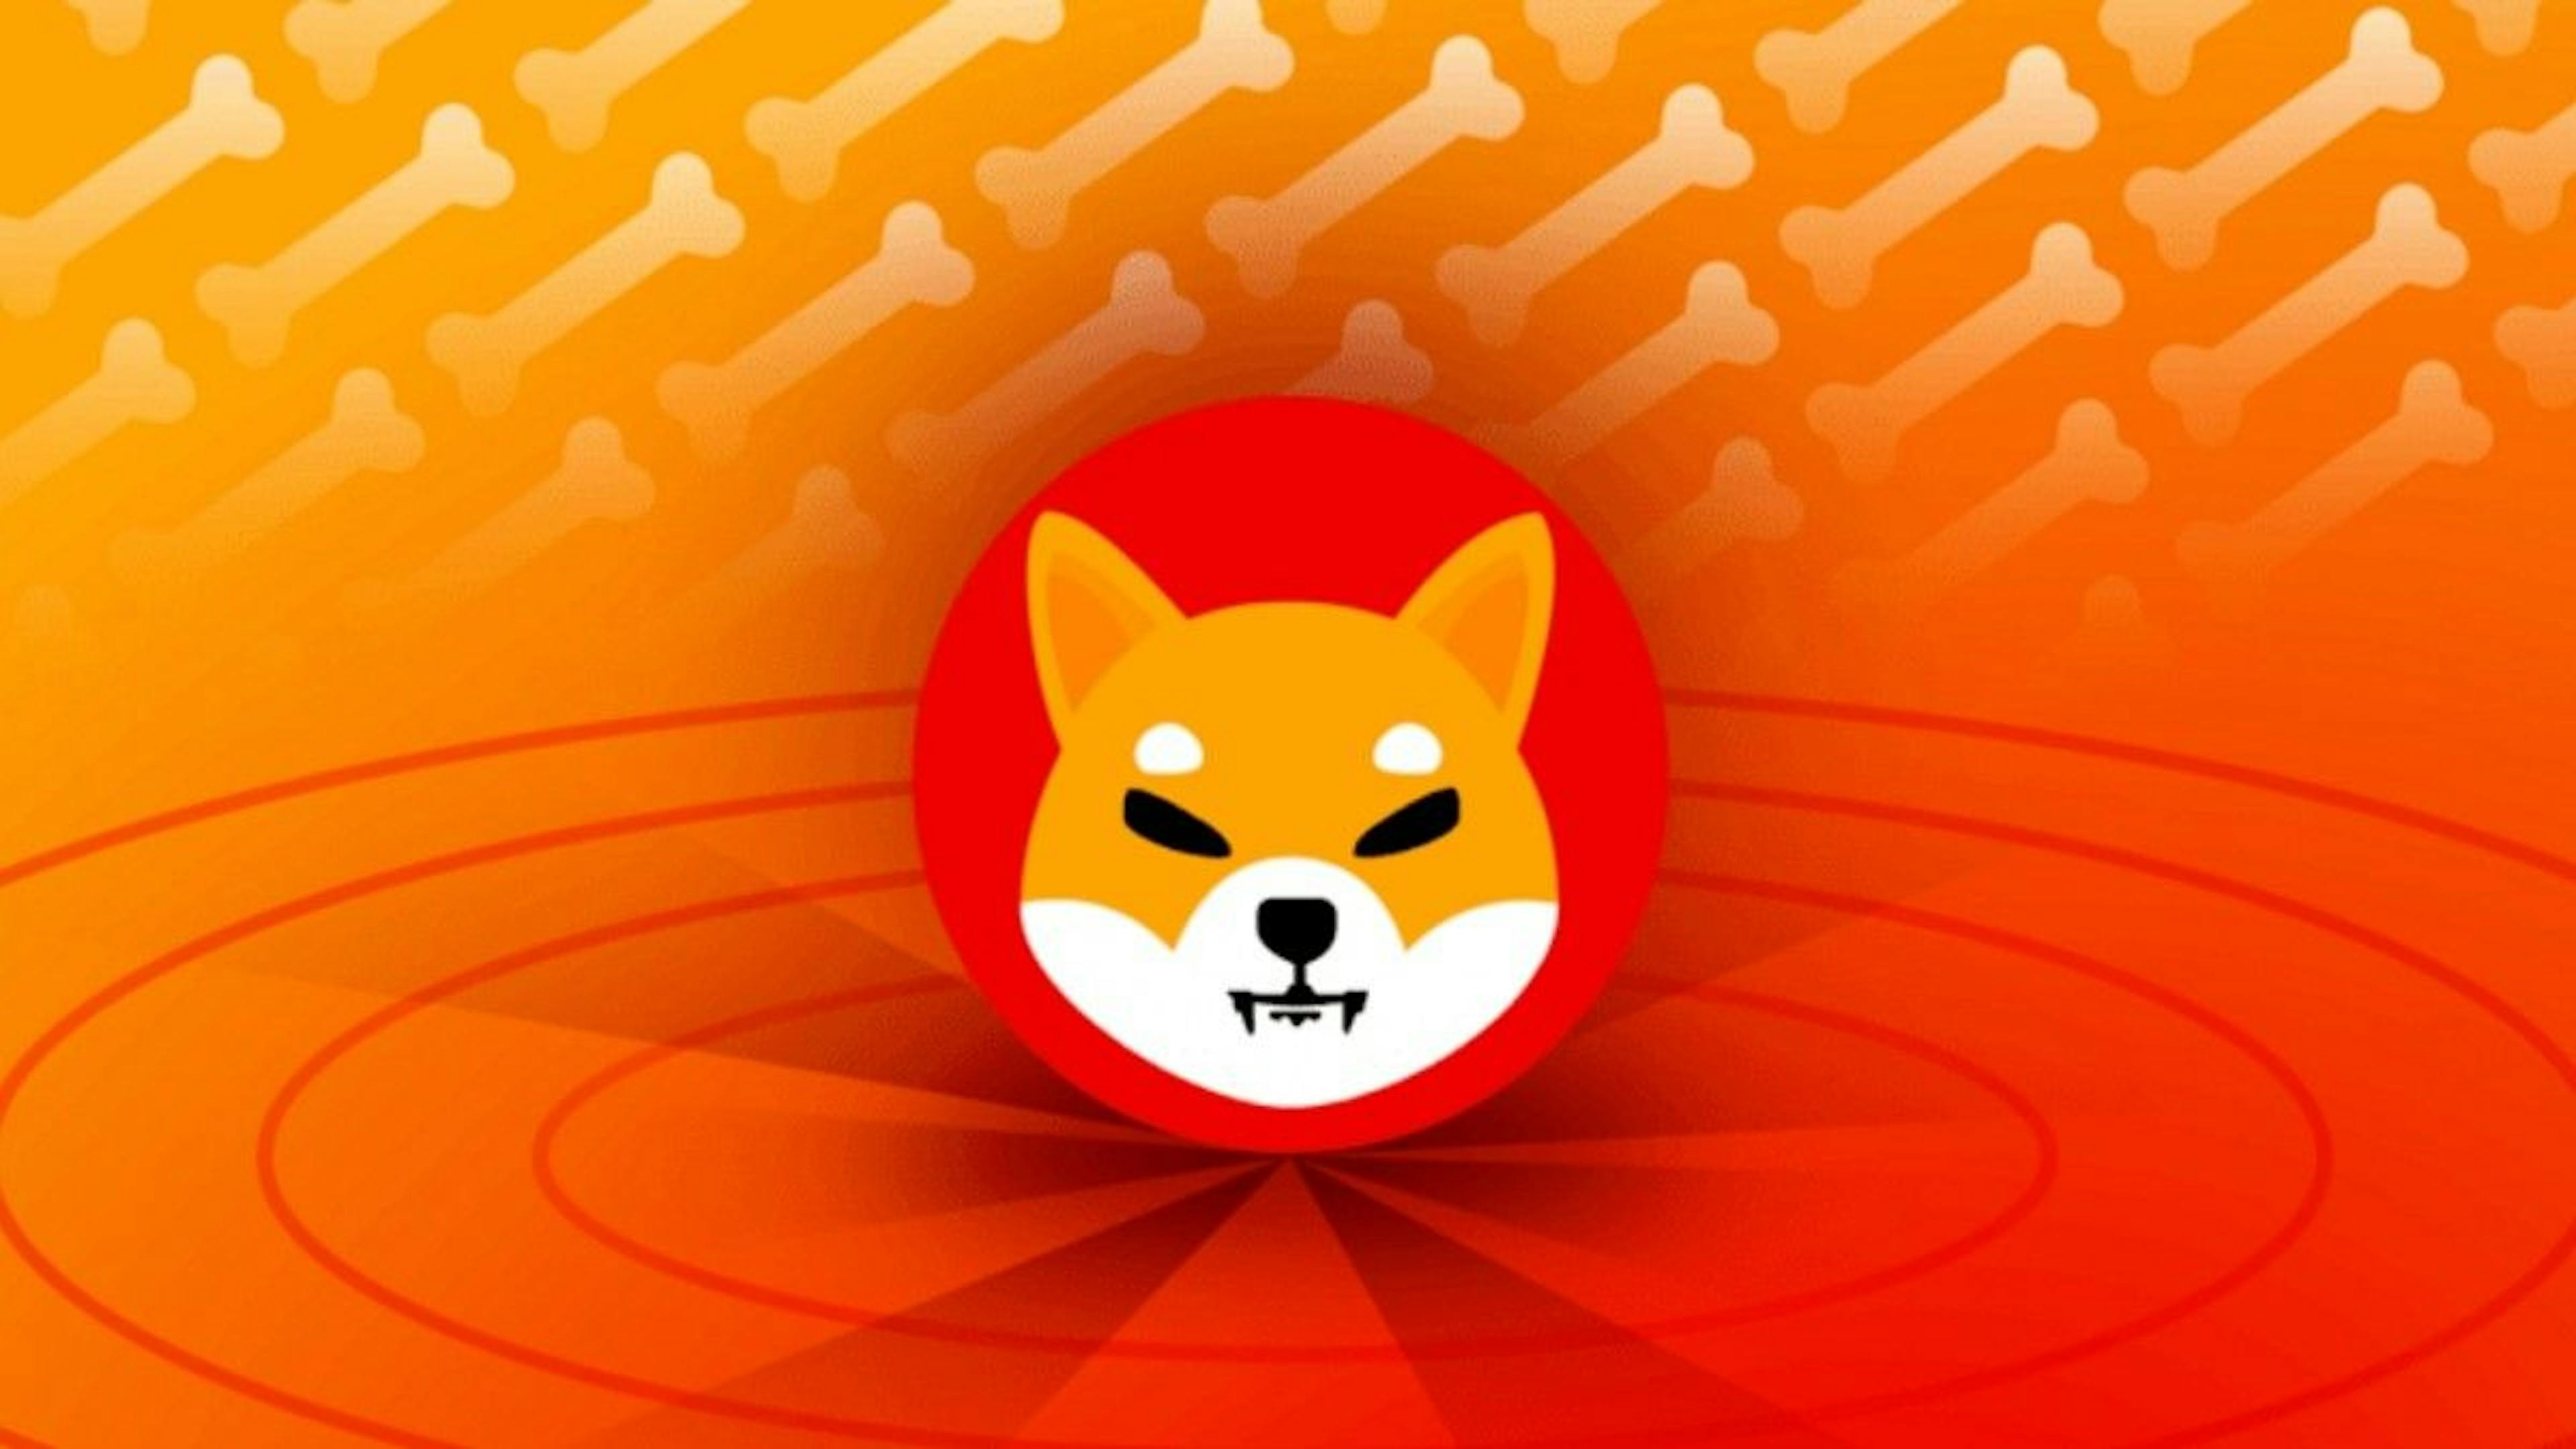 Source: https://www.outlookindia.com/outlook-spotlight/shiba-inu-shib-versus-the-next-big-thing-in-crypto-a-comprehensive-review-news-281797